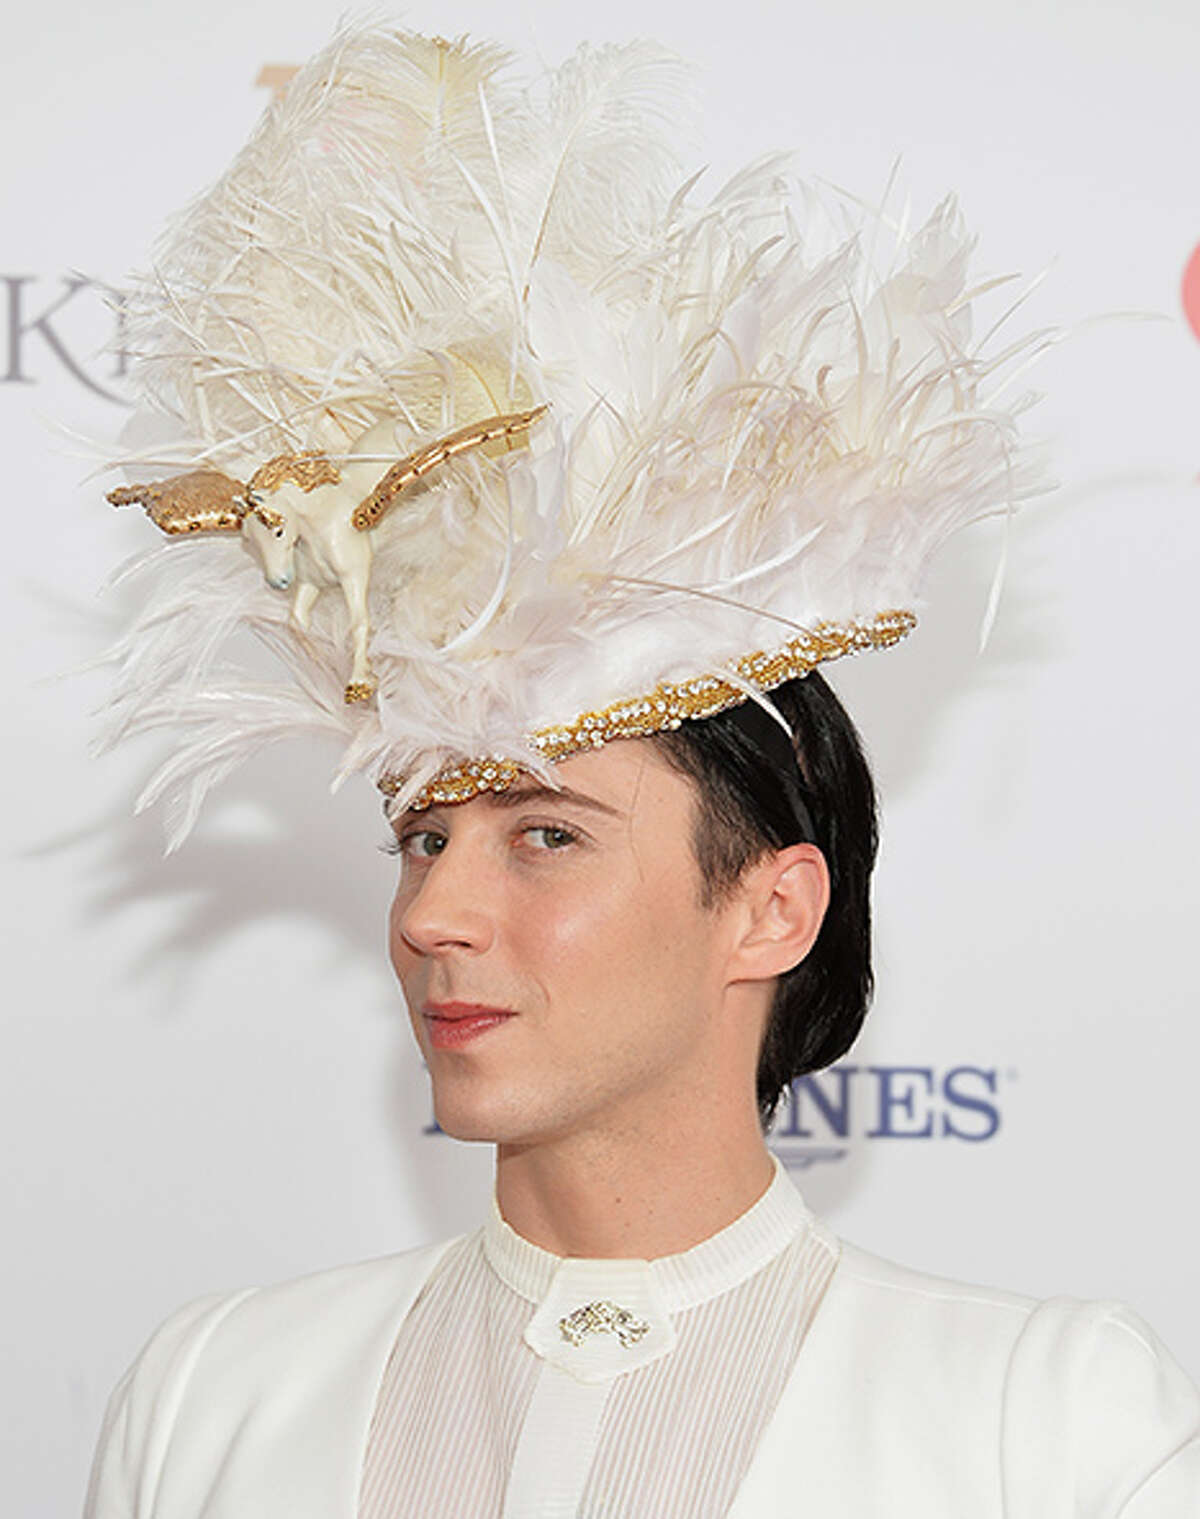 'Hunger Games or Olympics?' Johnny Weir's eyecatching outfits light up